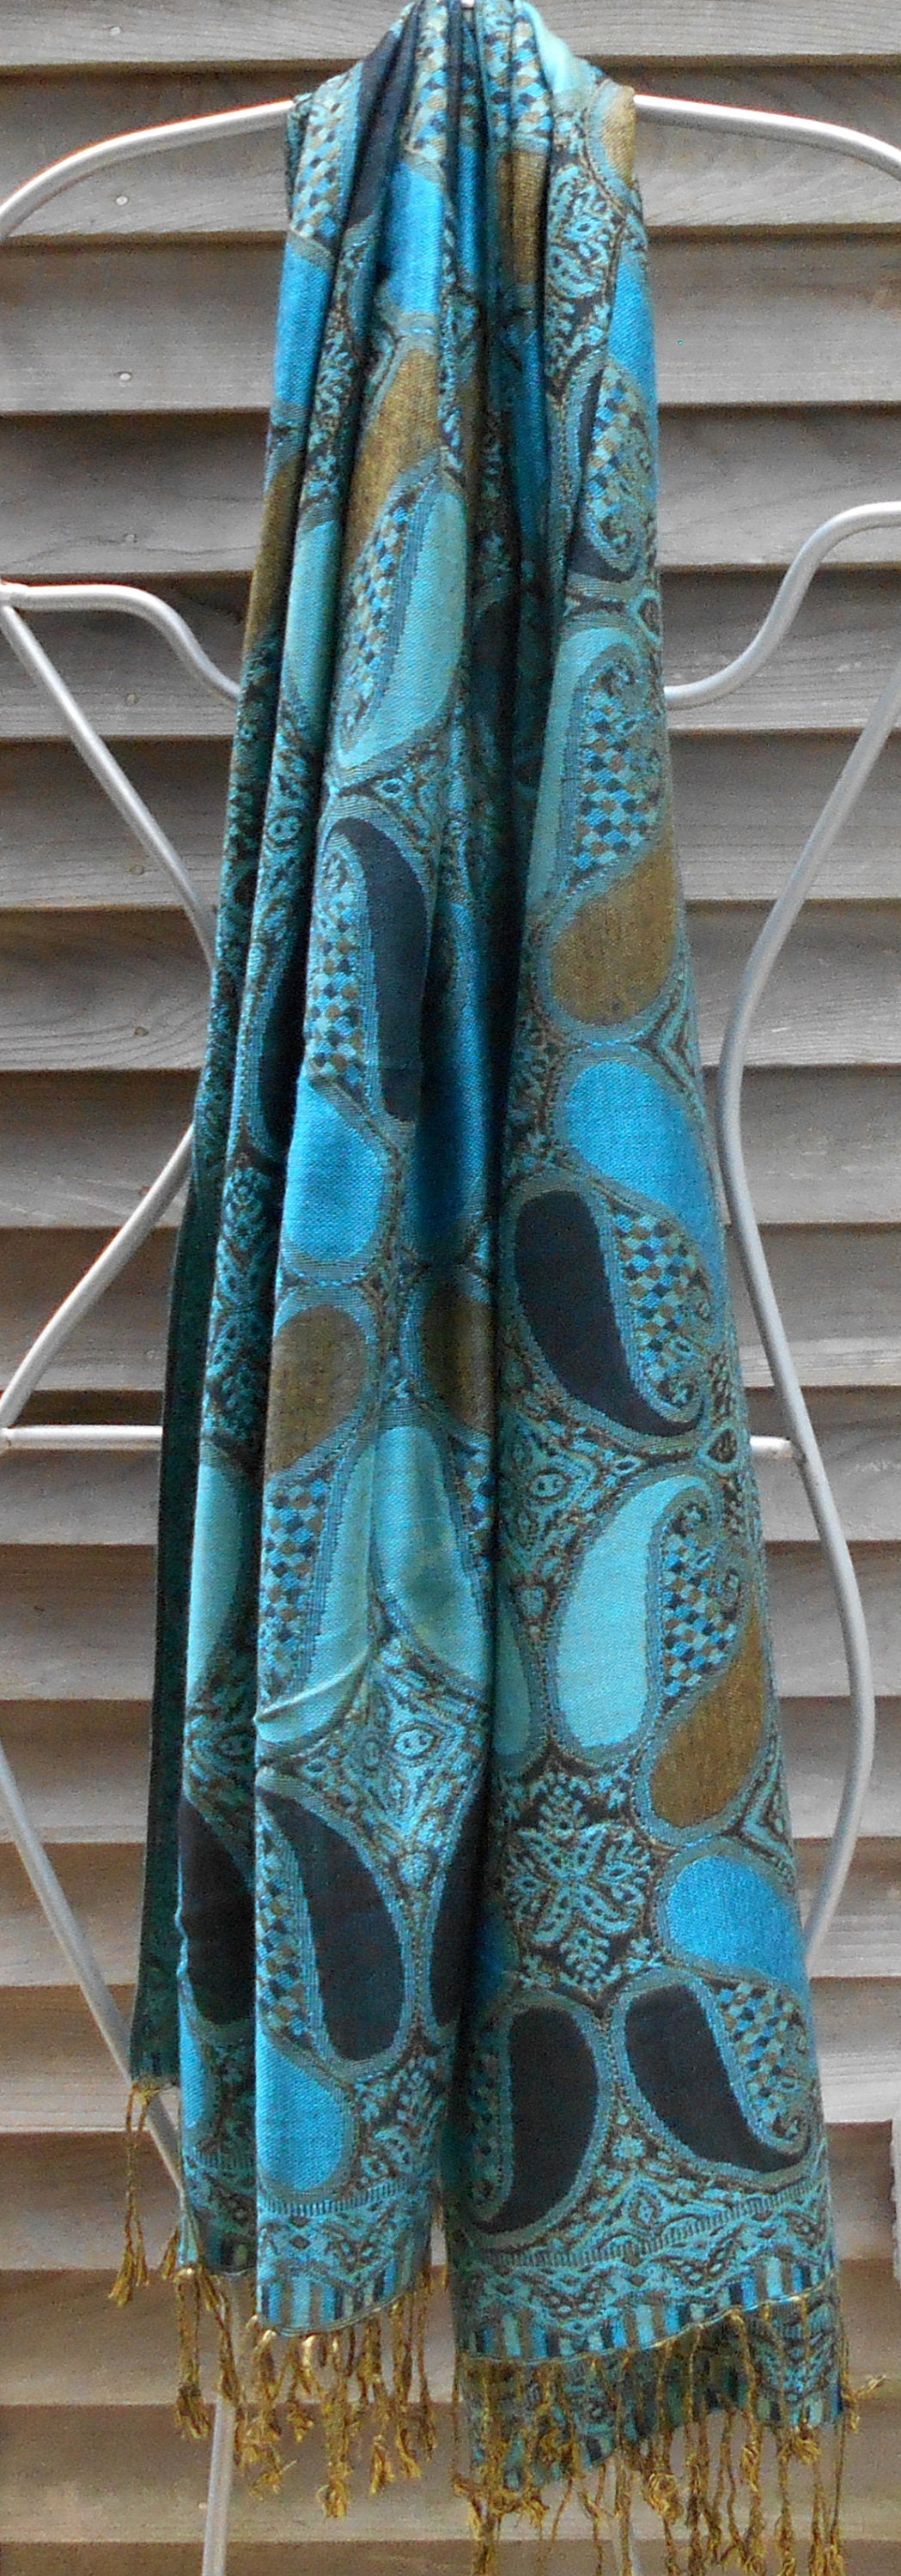 Festival Pashmina,Turquoise,Black and Brown Shawl,Mexican Serape ...